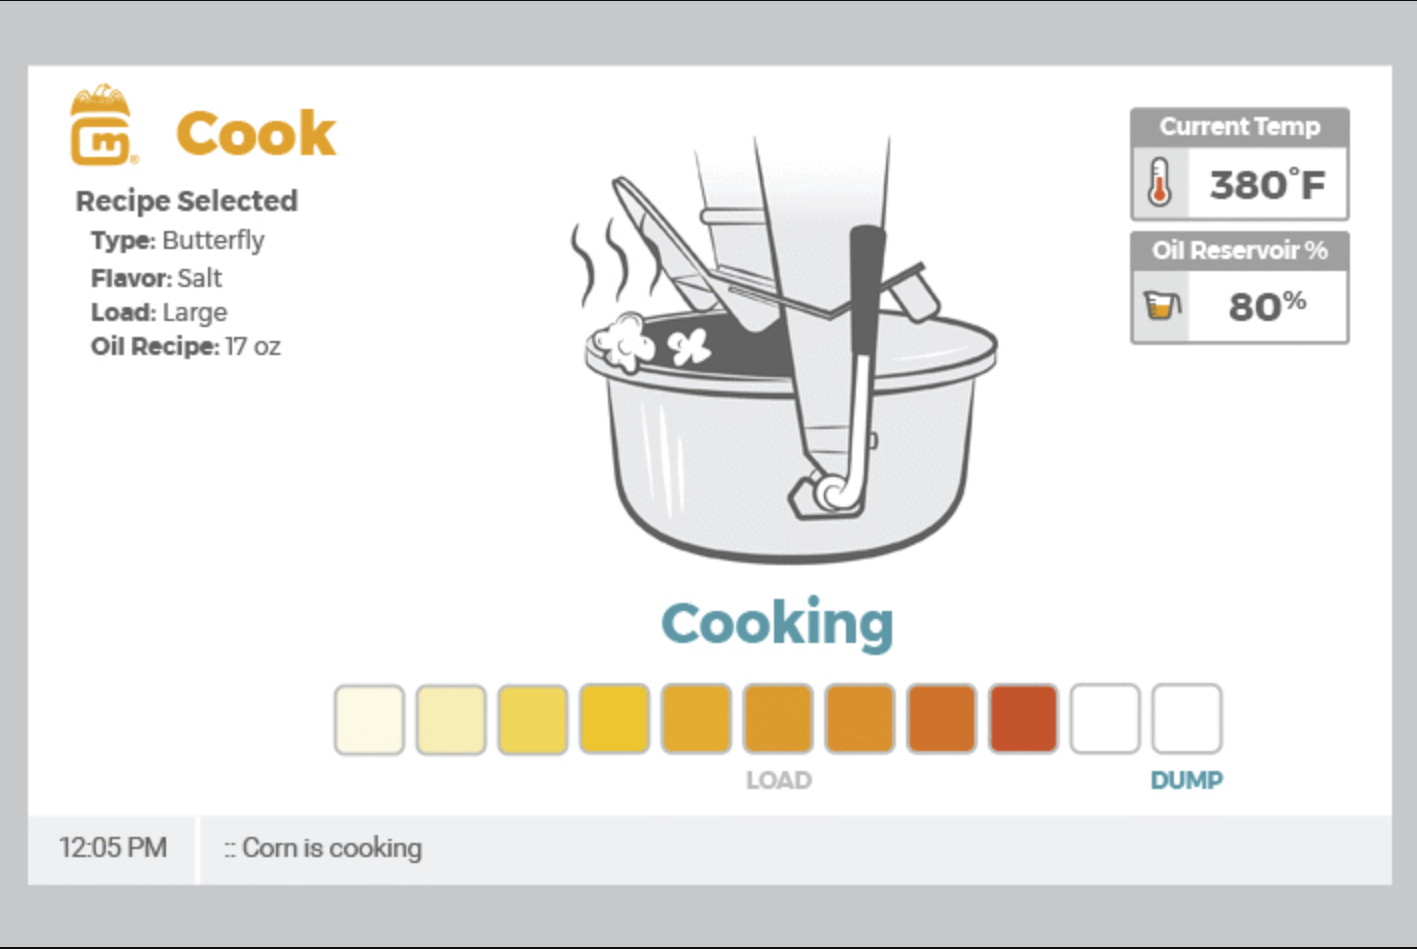 Gold Medal's Cooking Screen